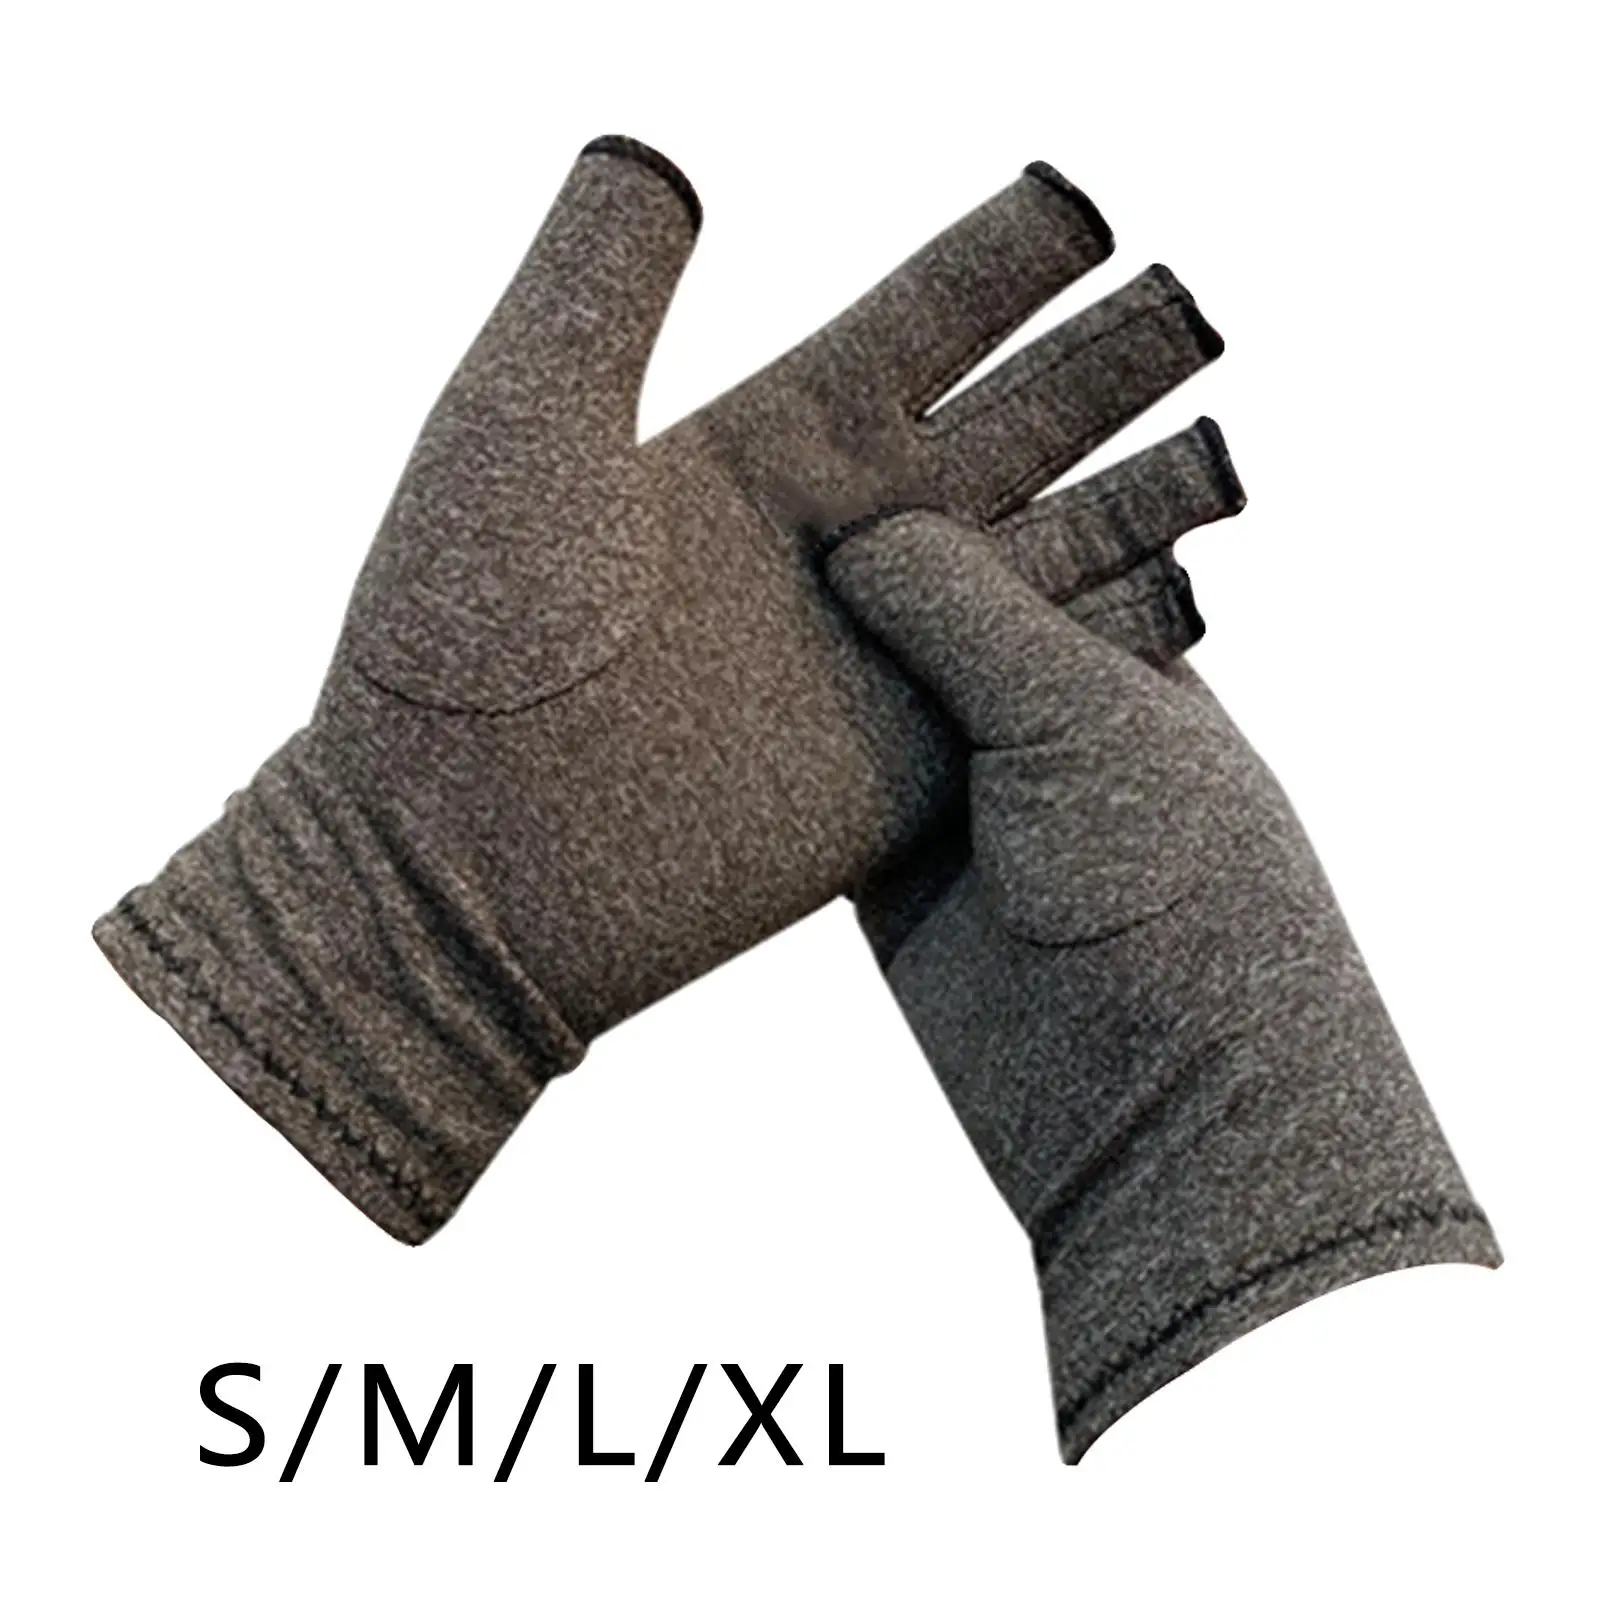 Fingerless Arthritis Compression Gloves  Wrist Brace Breathable Adjustable Arthritis Gloves for Cycling Training Fitness